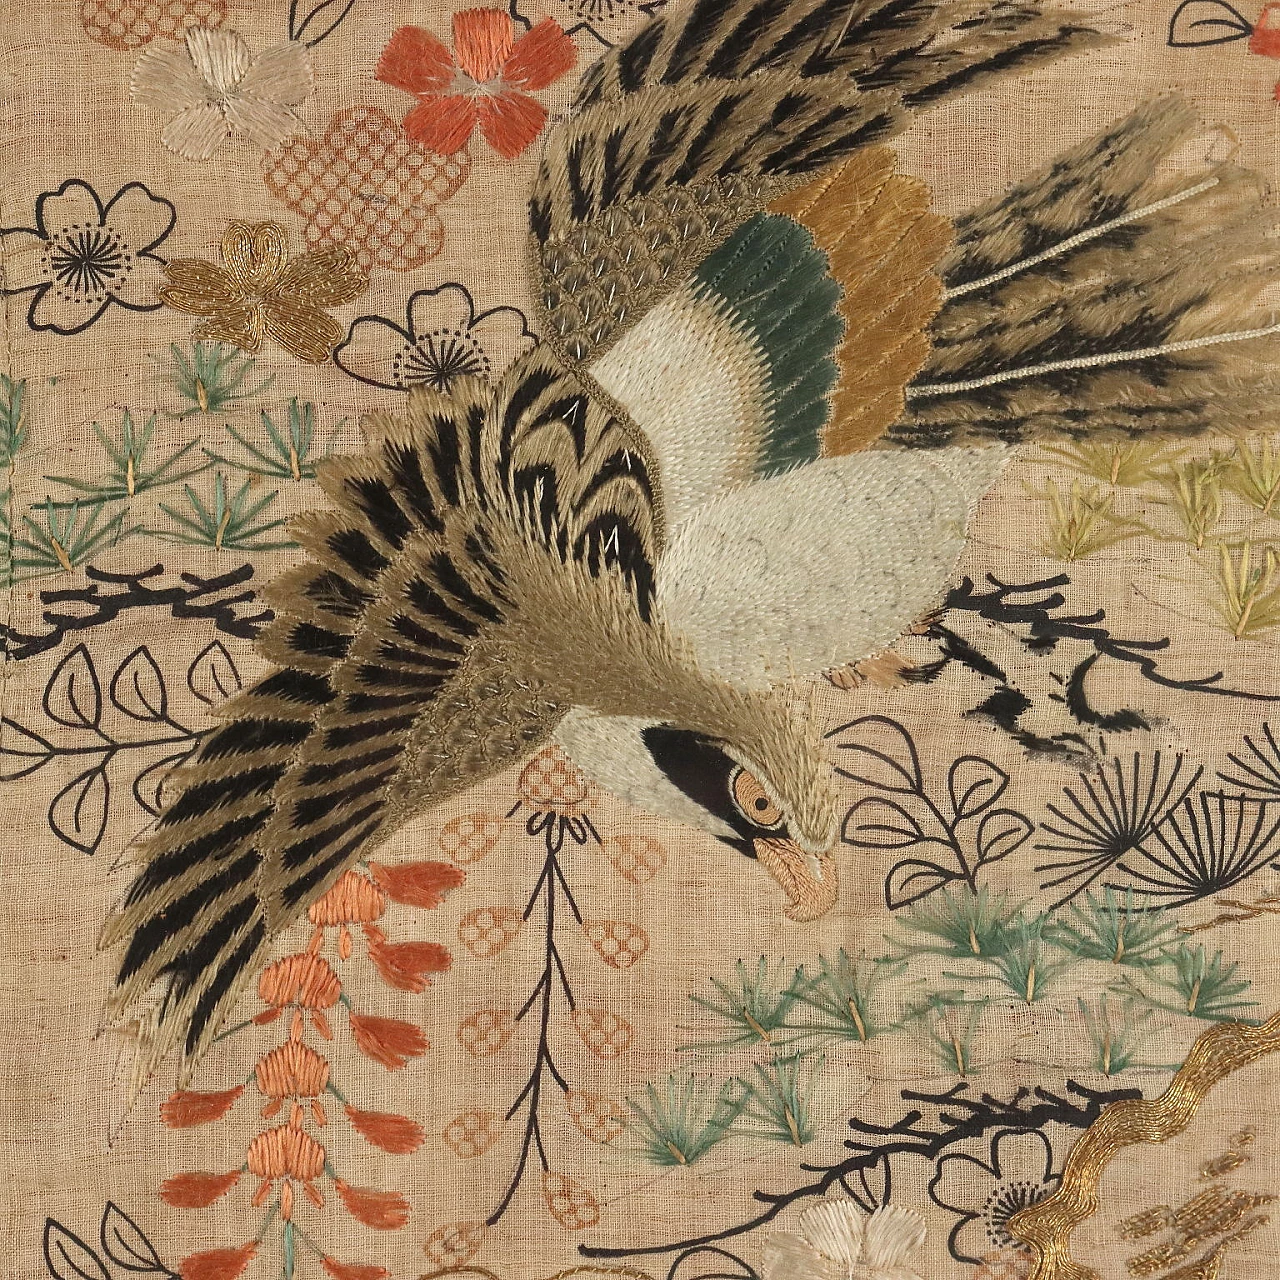 Naturalistic subject, embroidery panel, late 19th century 3